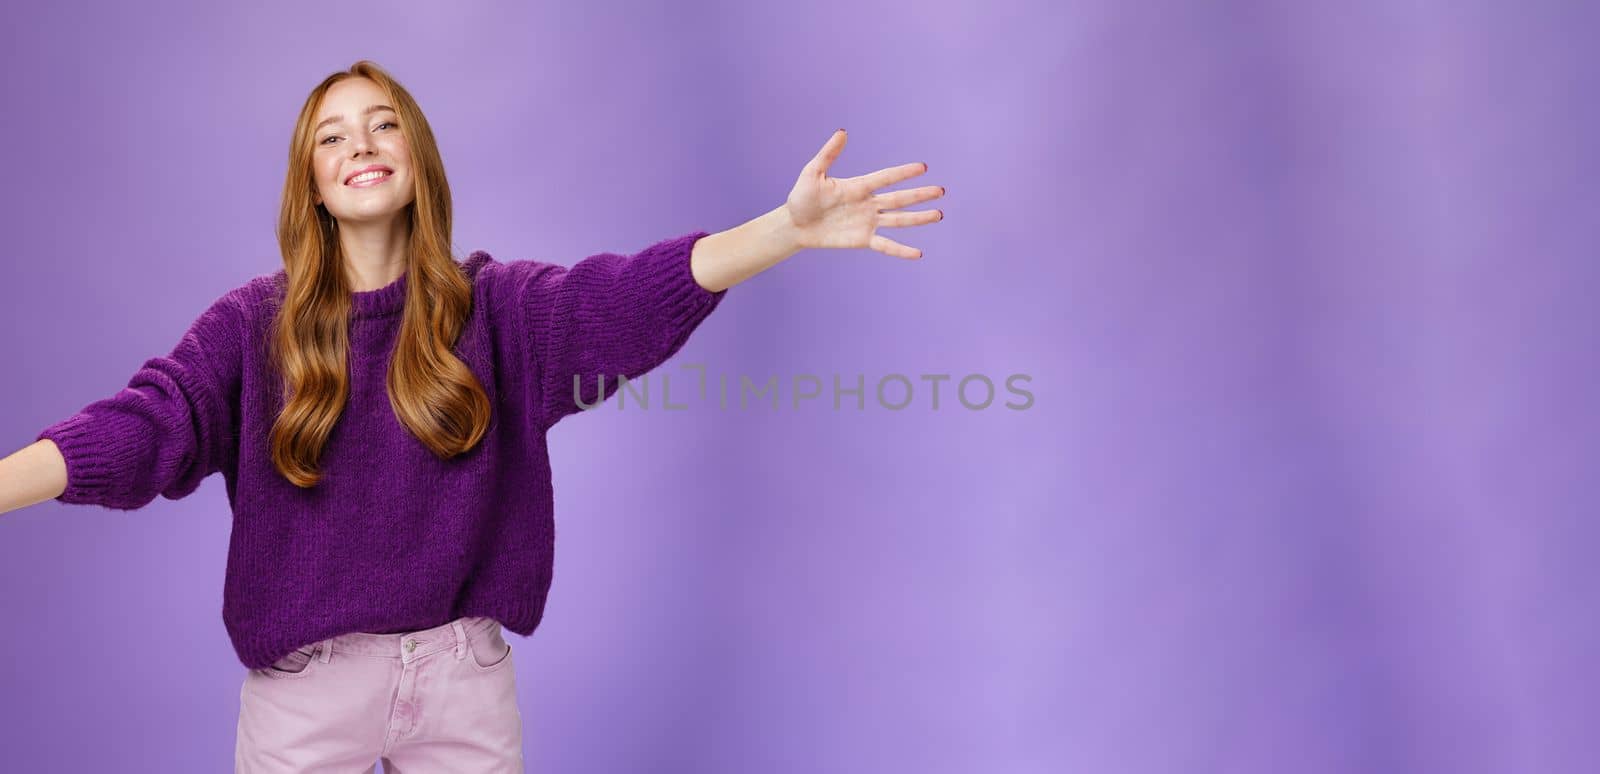 Come into my arms, girl wants give warm hug. Portrait of friendly and cute charming redhead woman stretching hands across copy space and looking forward with happy smile to cuddle and welcome guests.